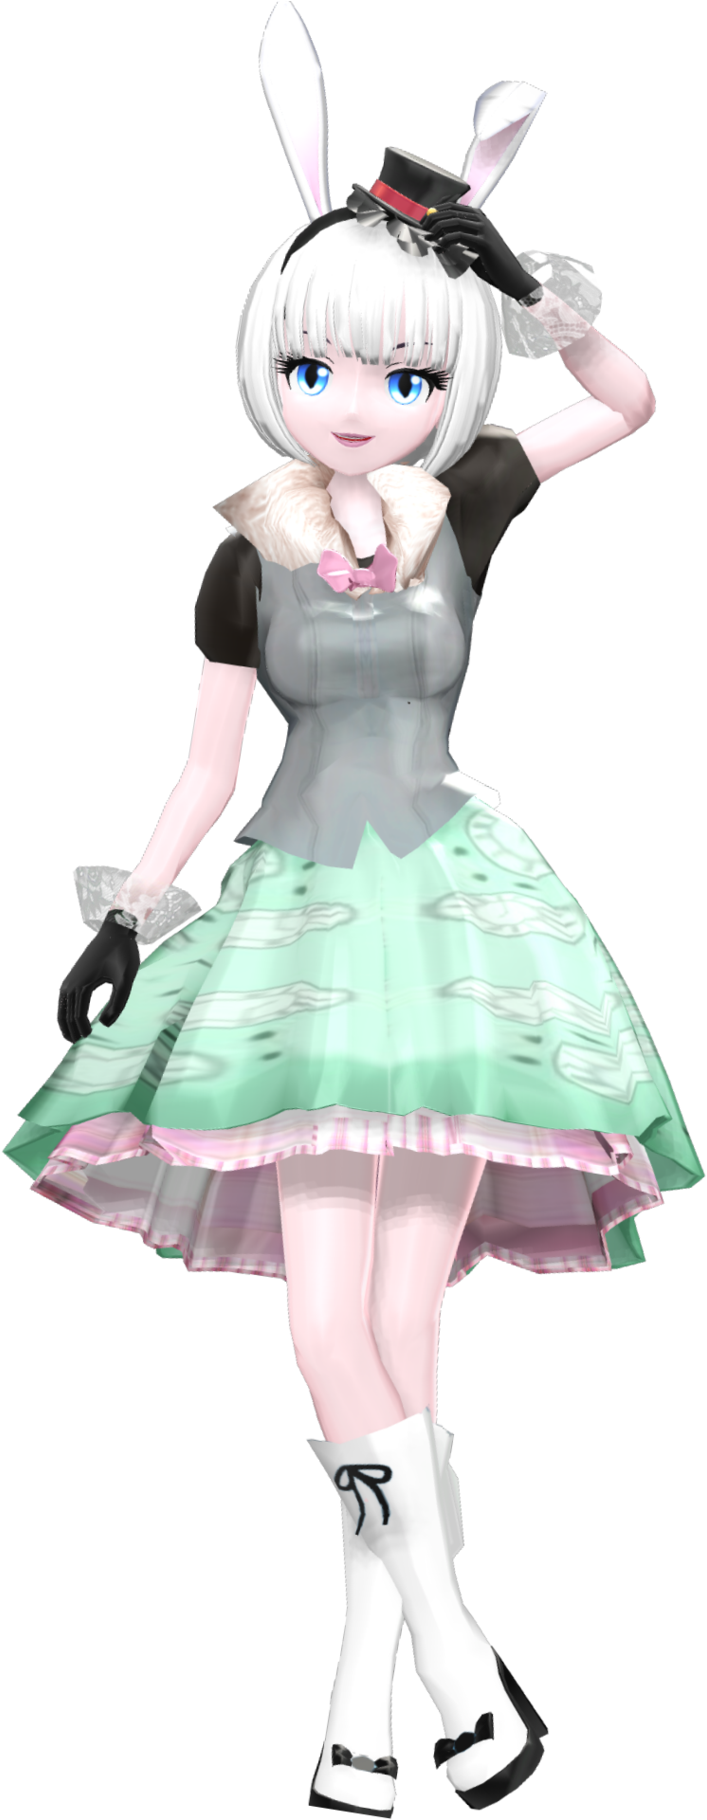 The Duchess Alice In Wonderland Mmd Bunny Blanc By - Ever After High Cosplay Bunny Blanc (1024x1820)